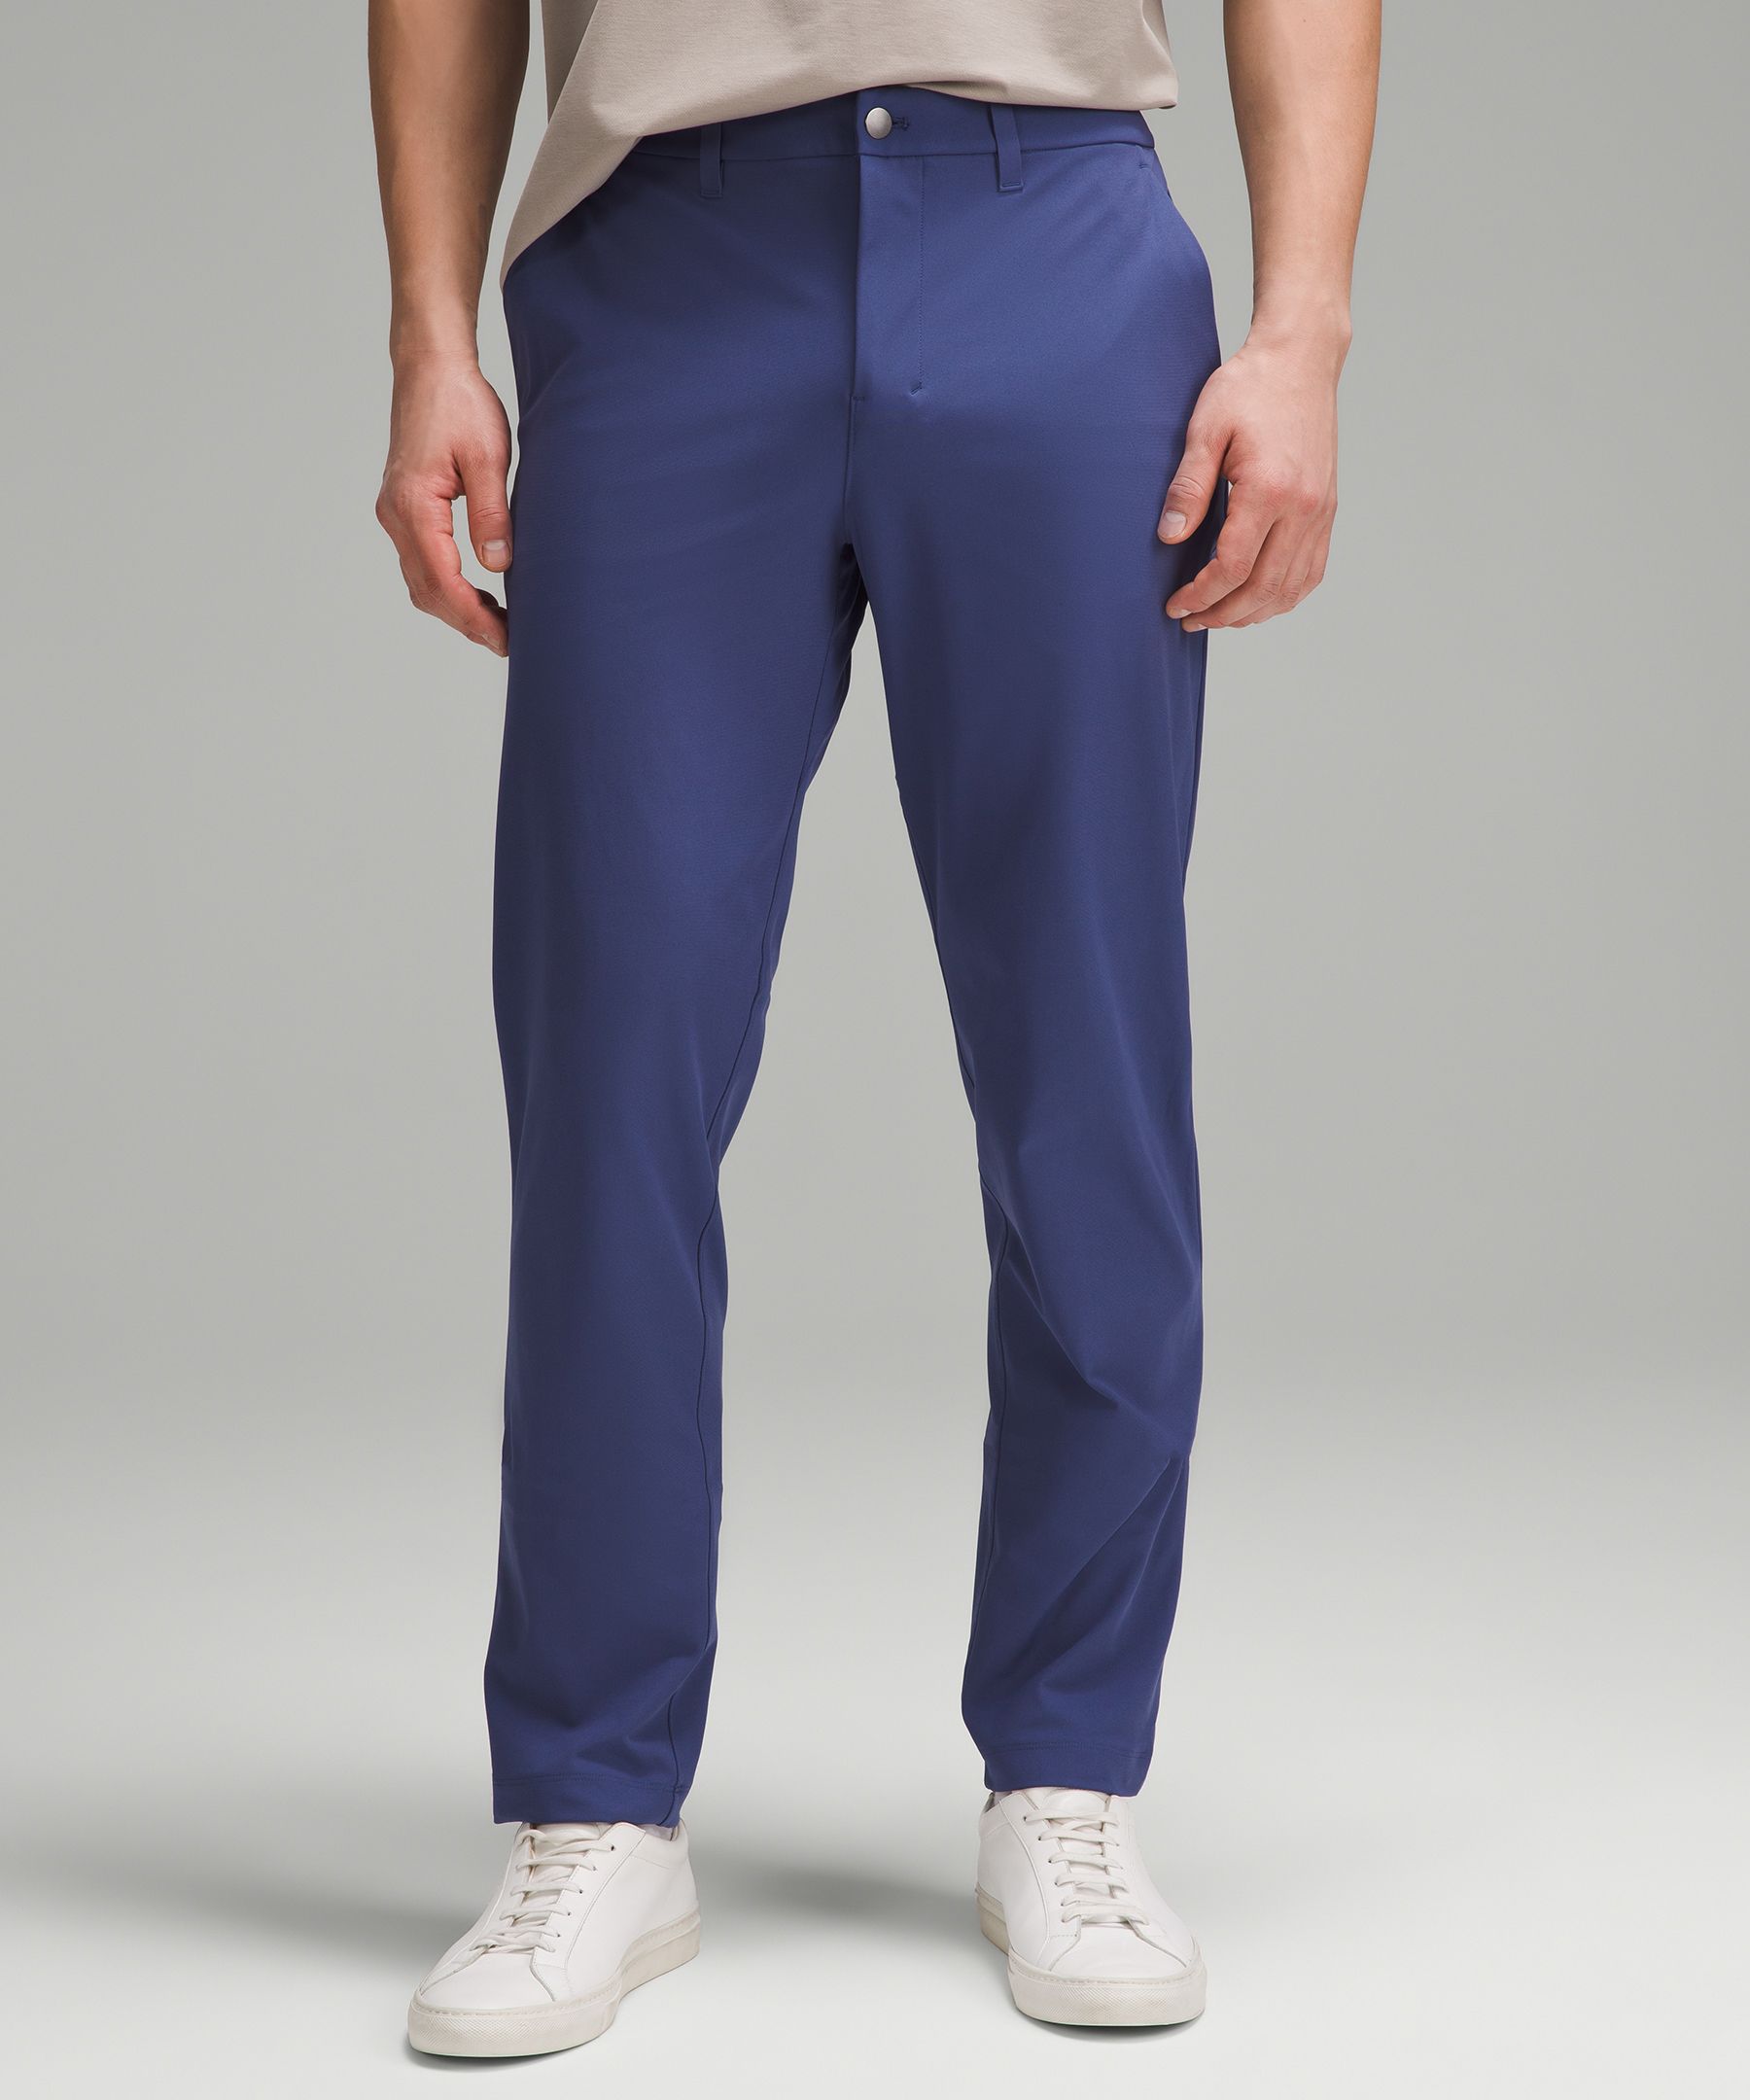 Classic Tennis Pants White for Men with straight-cut leg and ankle zippers